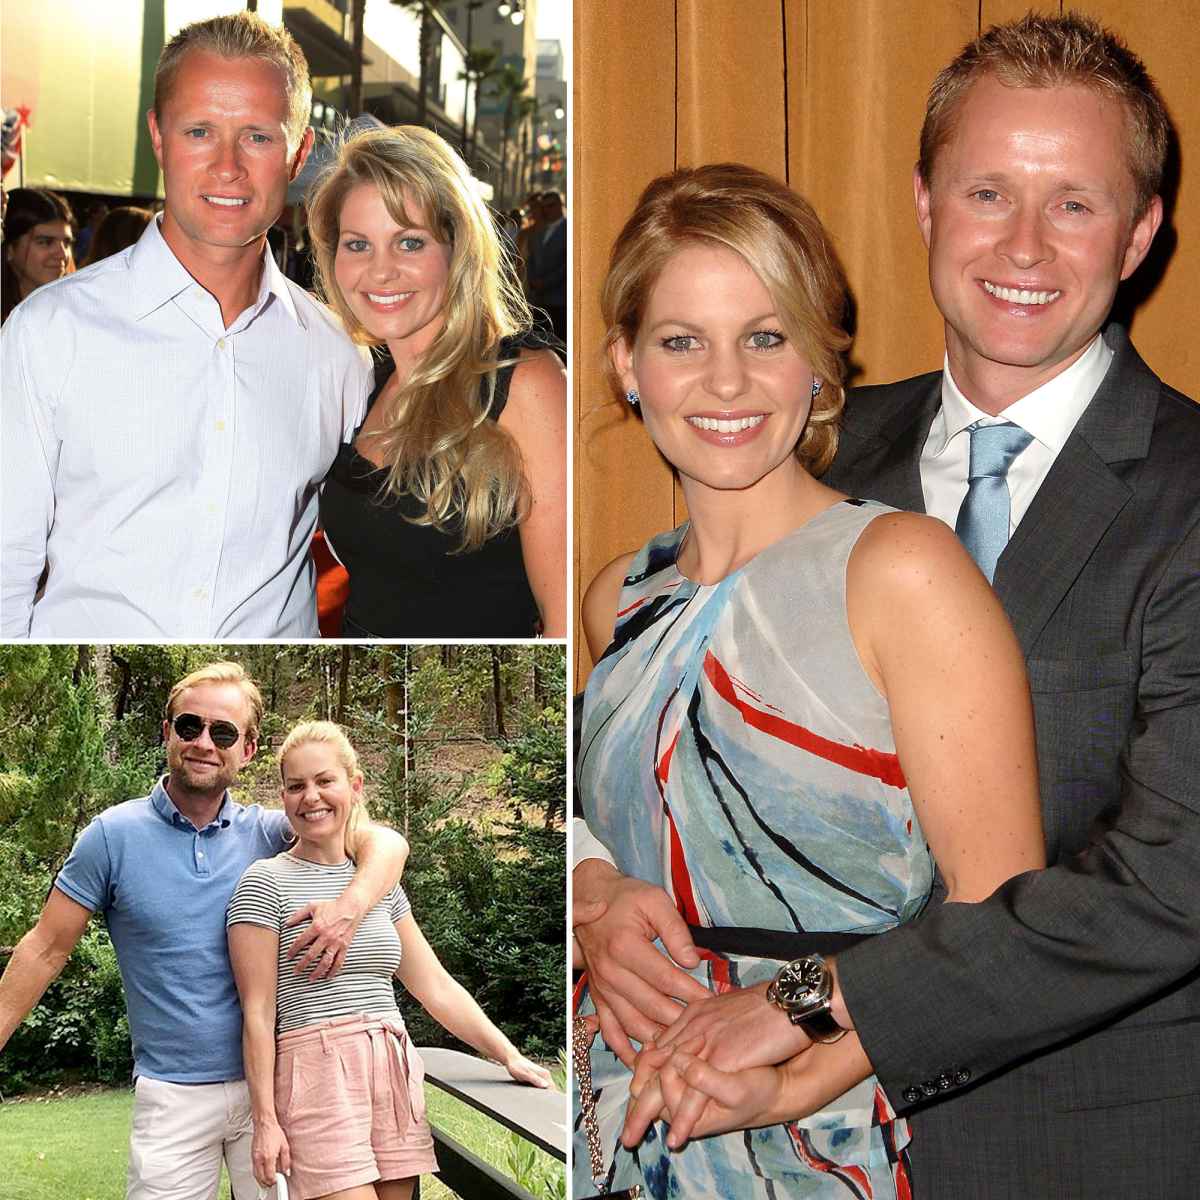 Fans attack Valeri Bure and wife Candace Cameron after posting  “inappropriate” photo - HockeyFeed